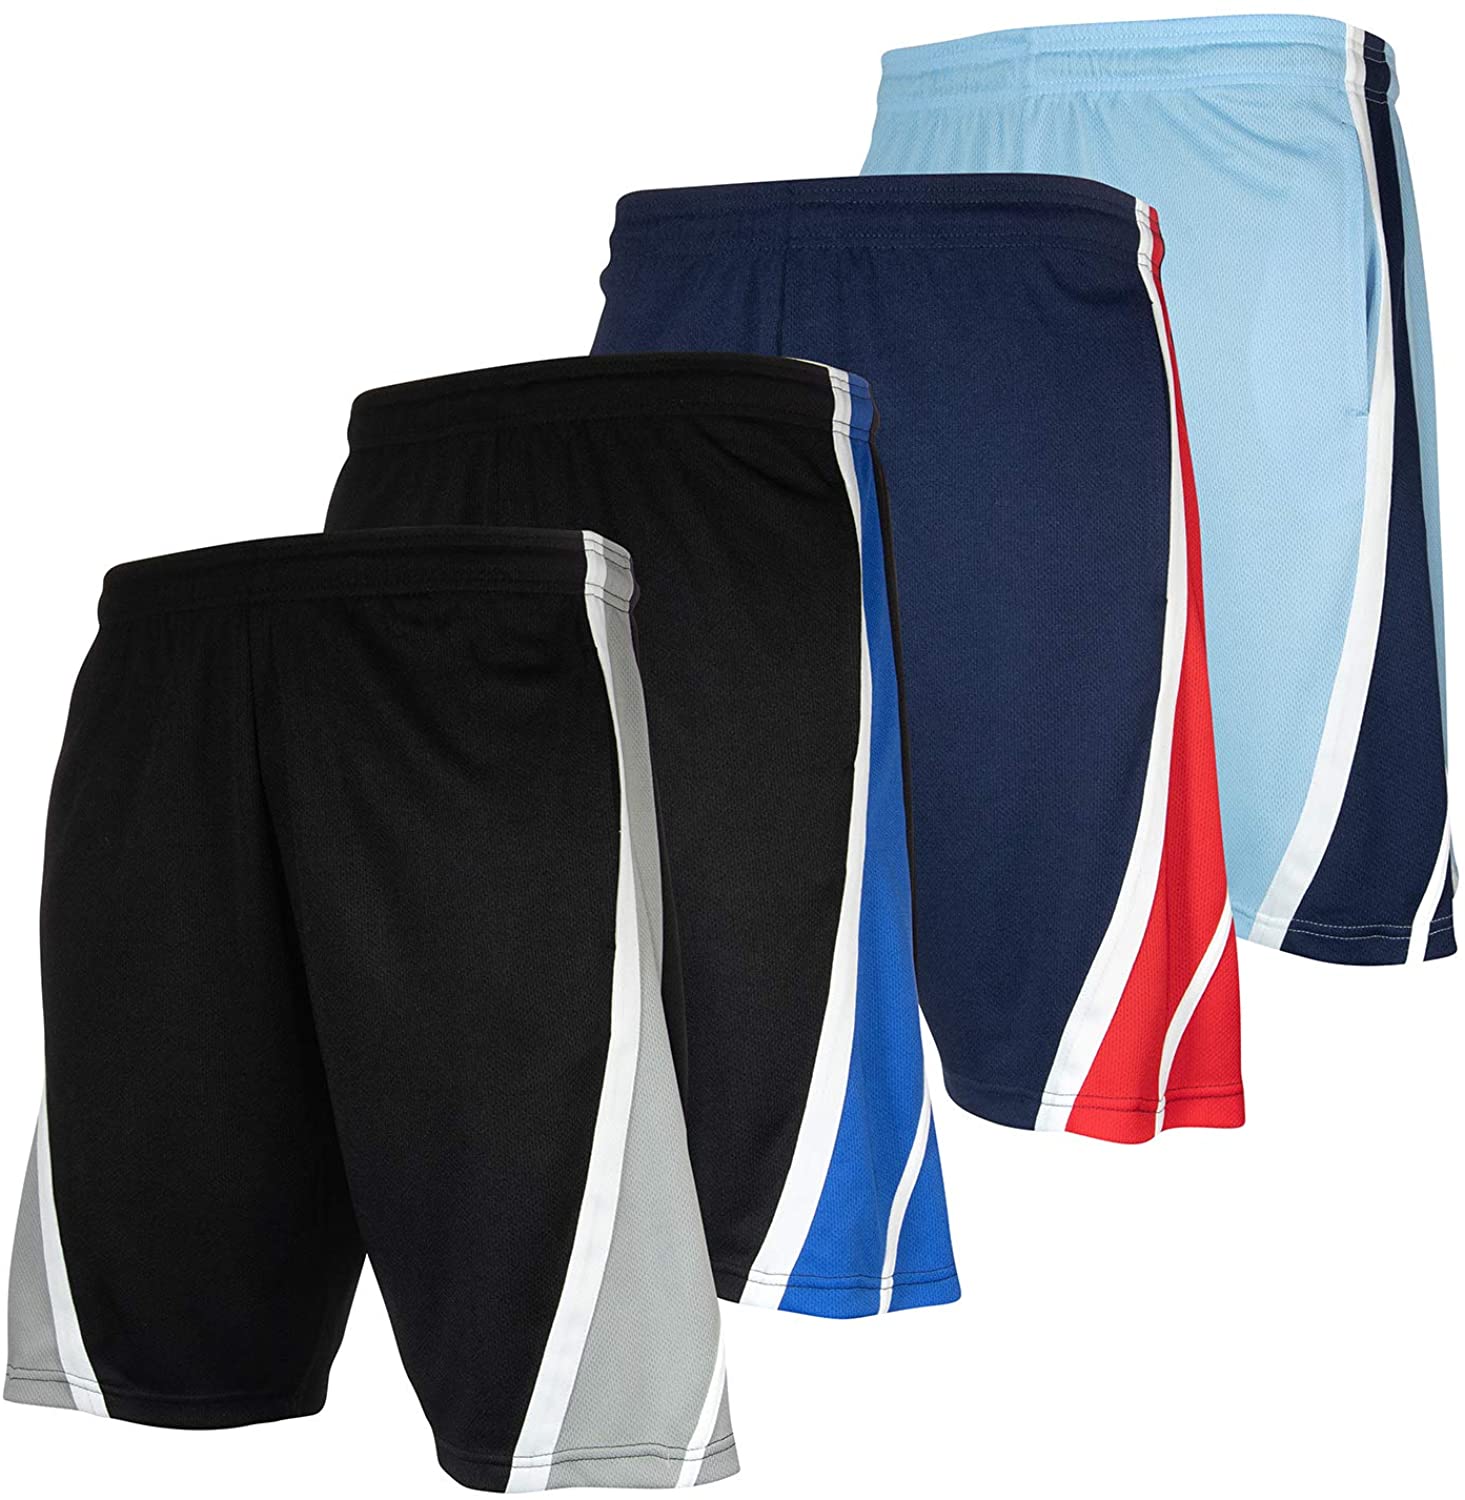 Sports and Exercise High Energy Long Basketball Shorts for Men Fitness 4 Pack Athletic Performance 